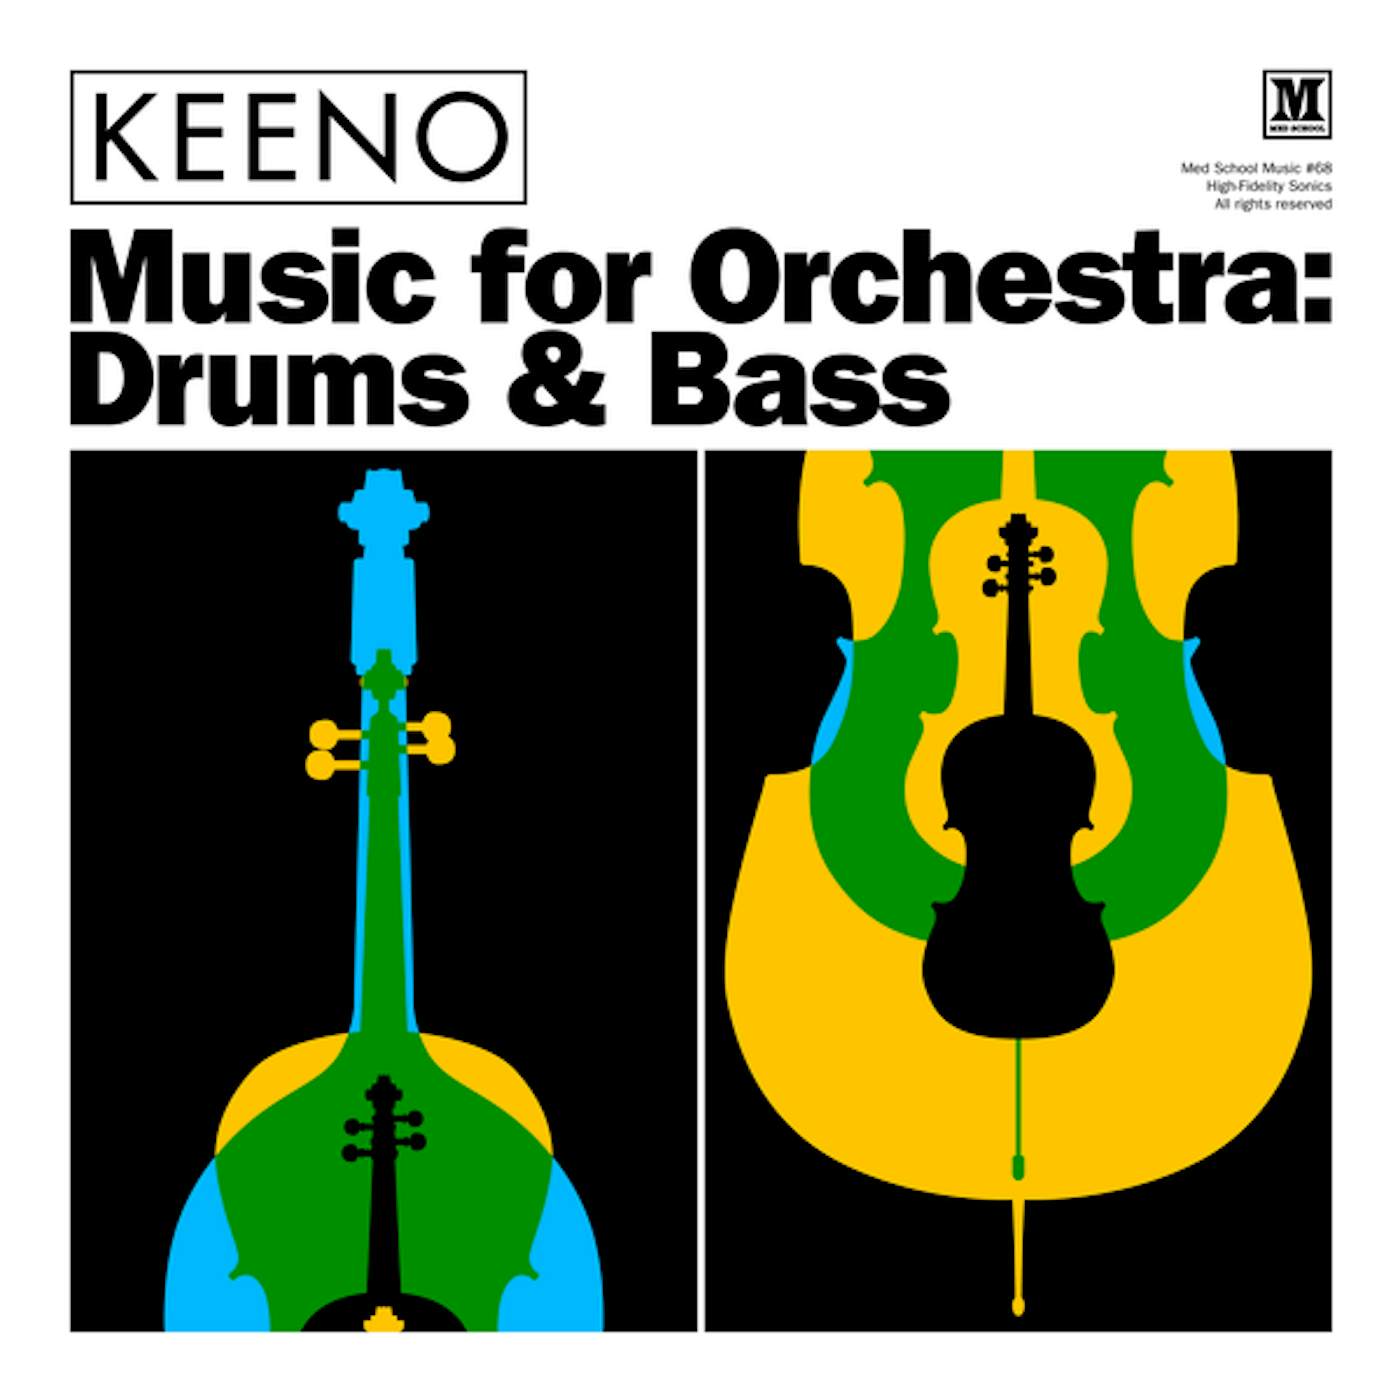 Keeno Music For Orchestra: Drums & Bass